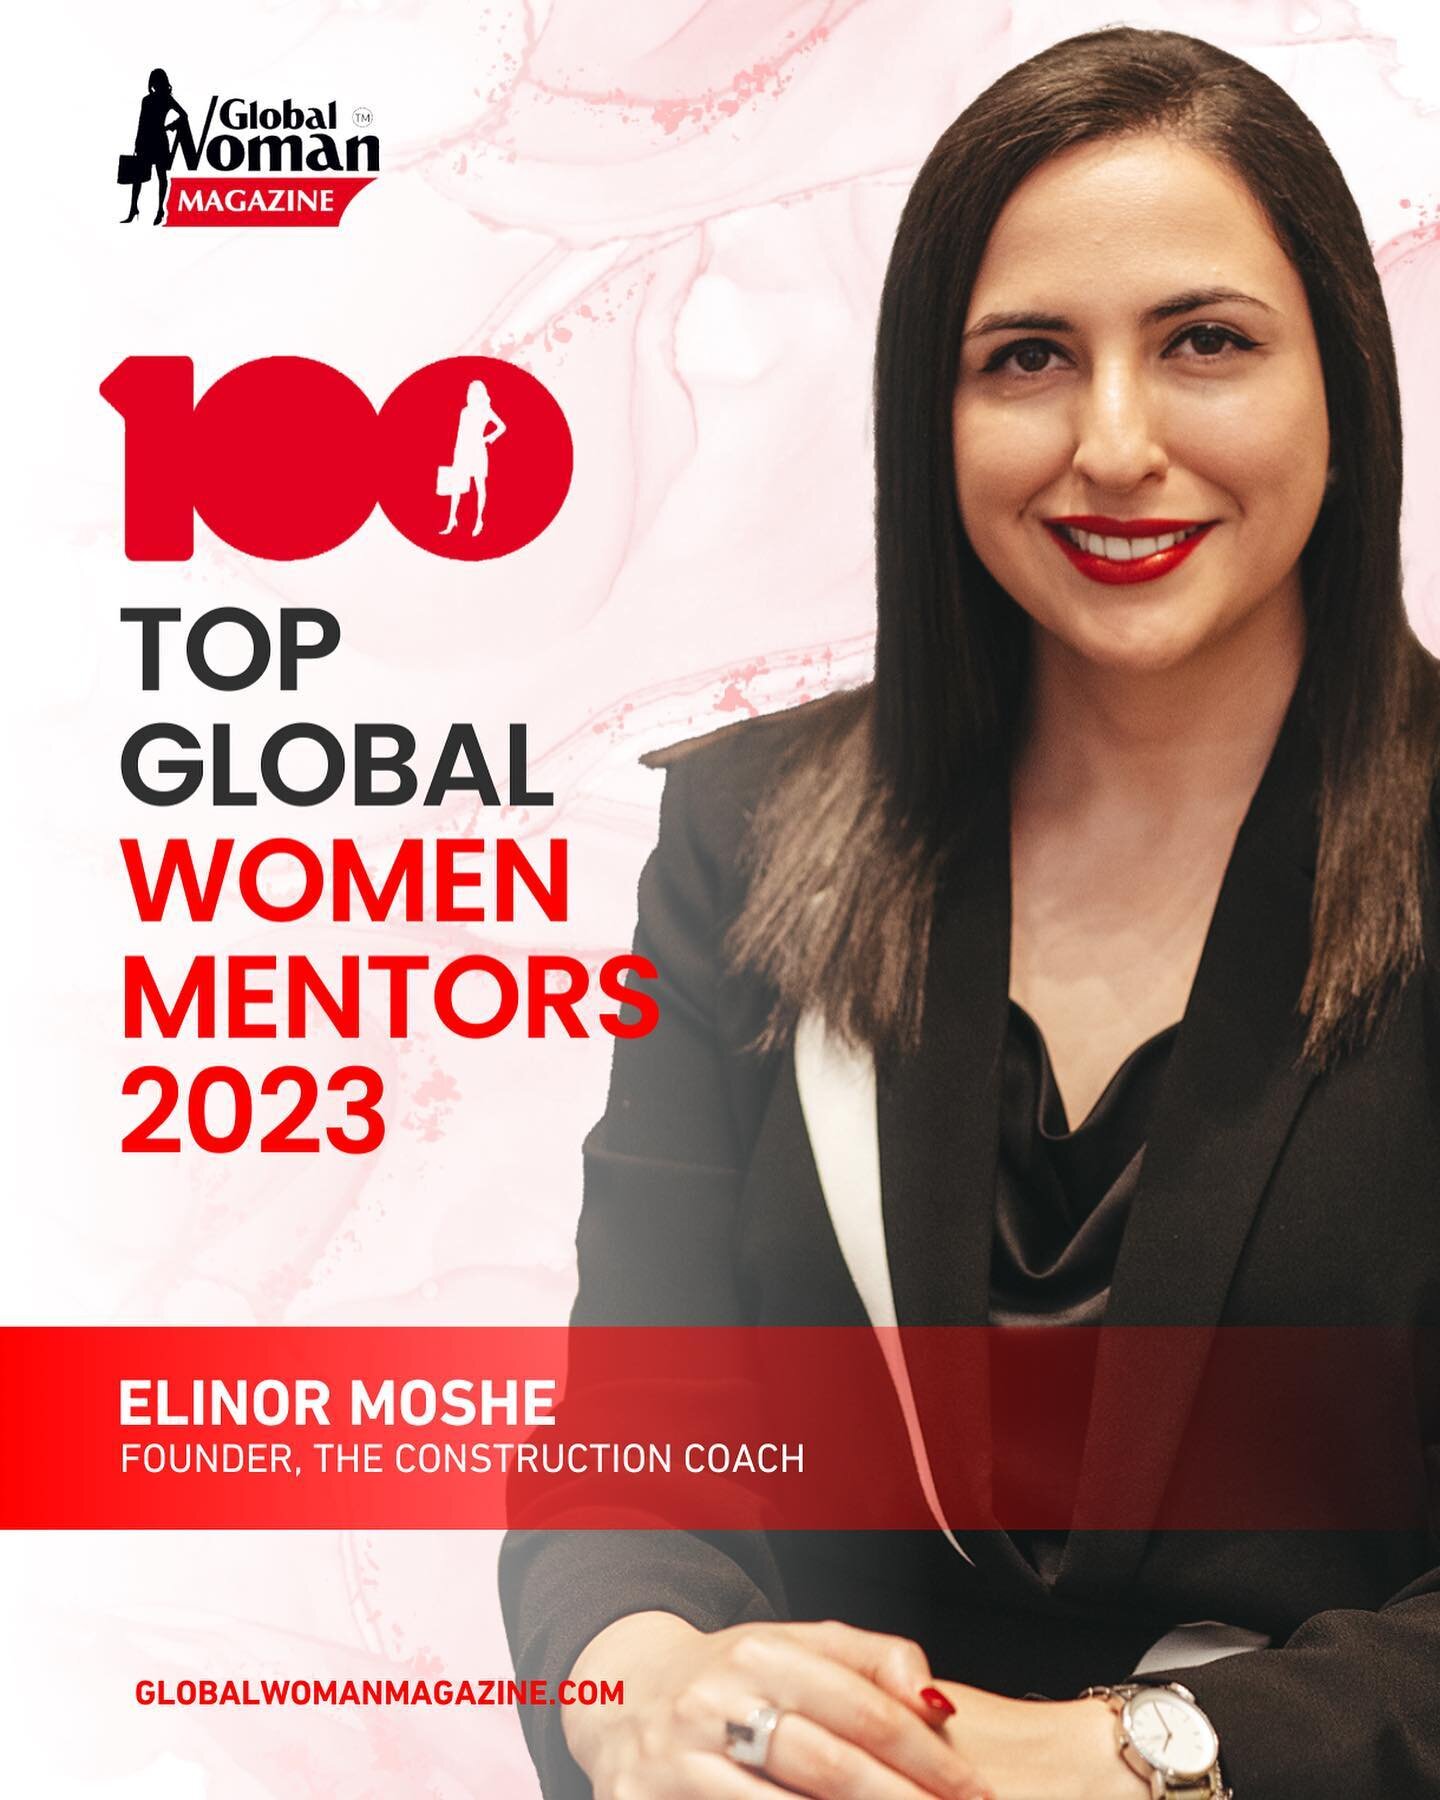 It's a pleasure and privilege to be recognized as a Top 100 Global Women Mentor 2023 by Global Women Magazine. 

I'm grateful to all who've chosen me as their mentor over the years, and for the ability to deeply transform many in the industry through